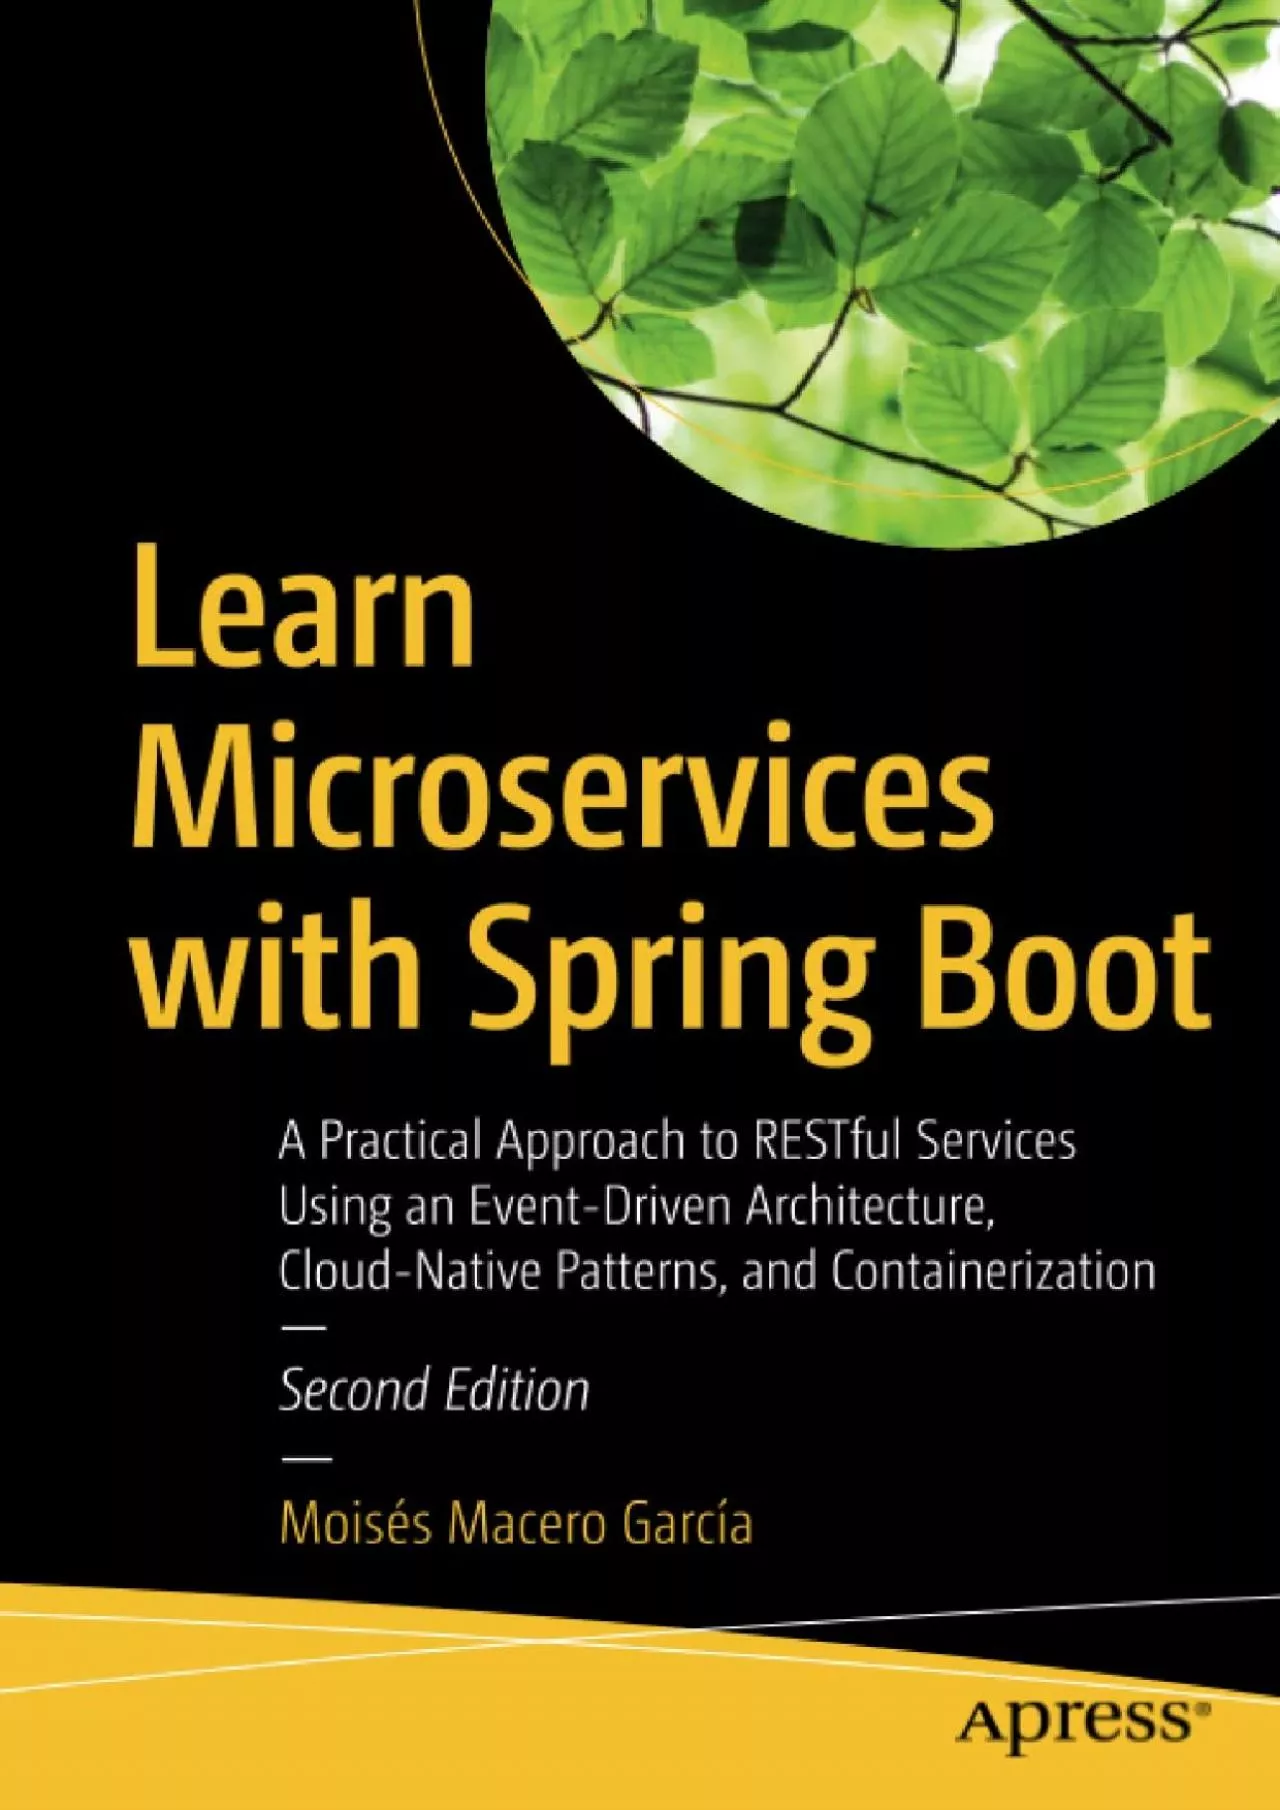 [eBOOK]-Learn Microservices with Spring Boot: A Practical Approach to RESTful Services